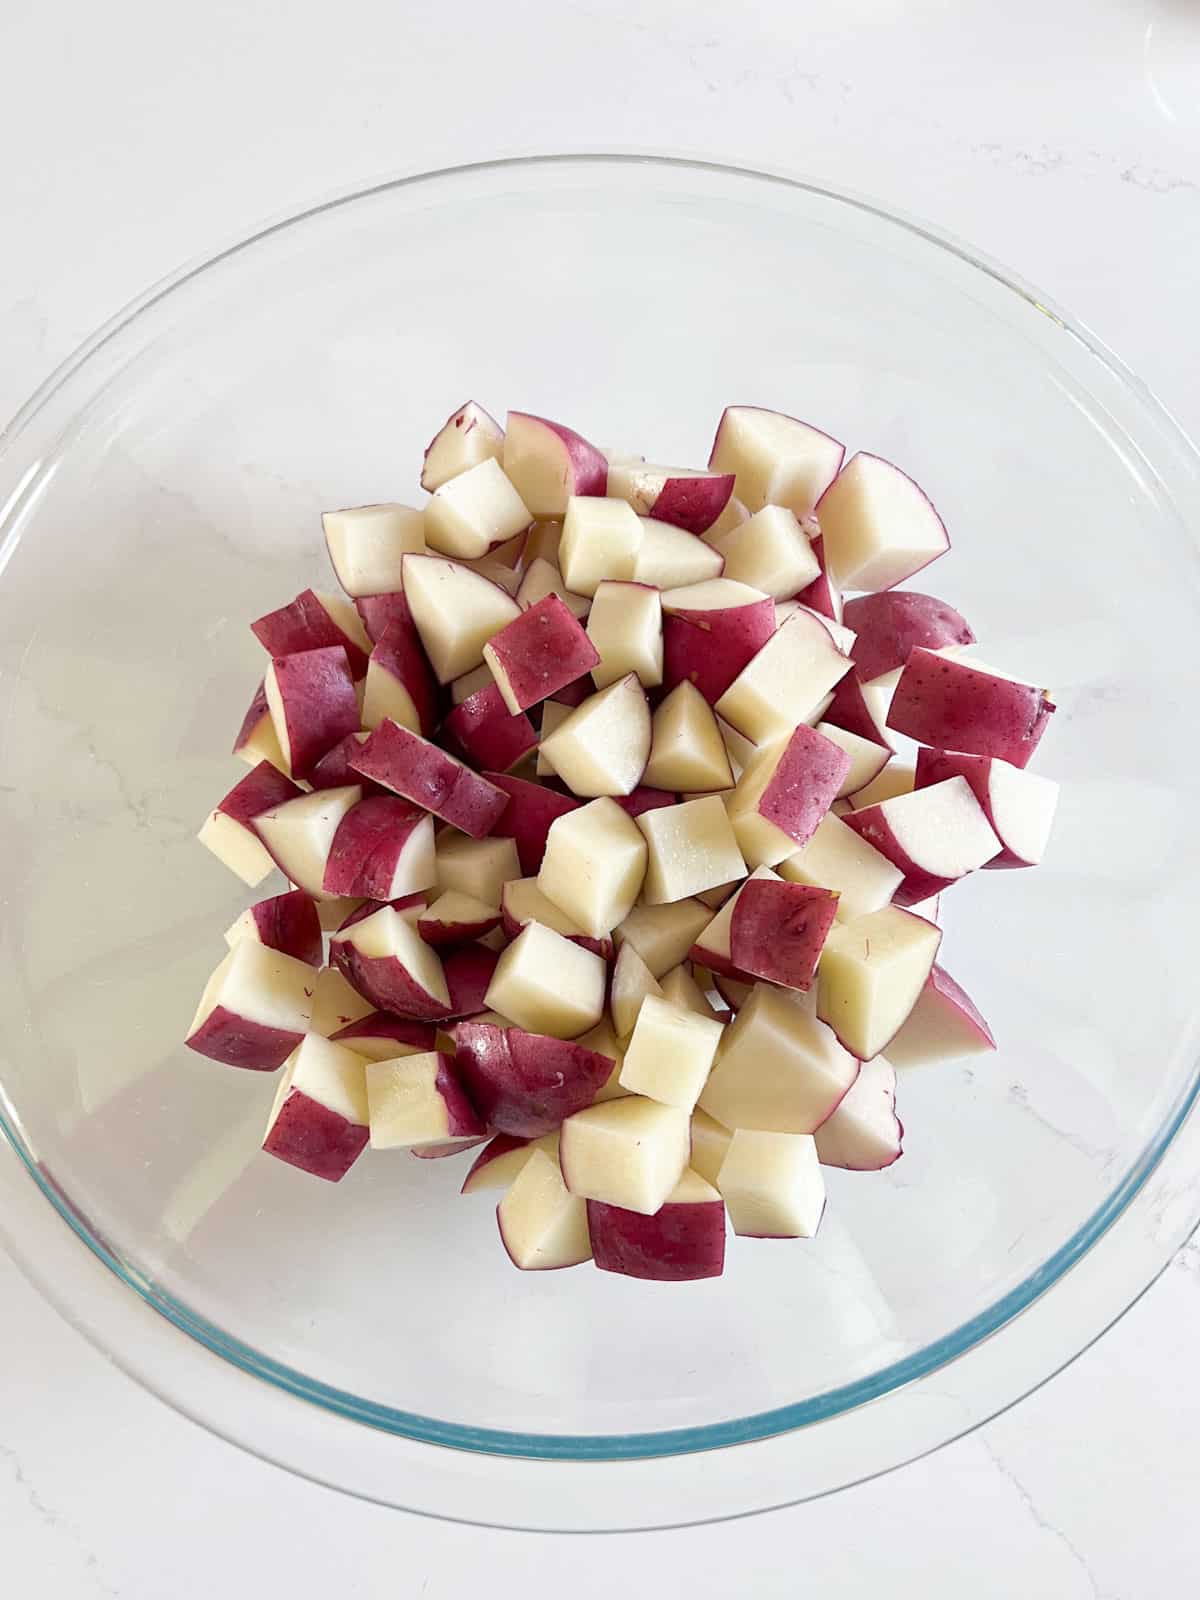 Diced red potatoes in a bowl.